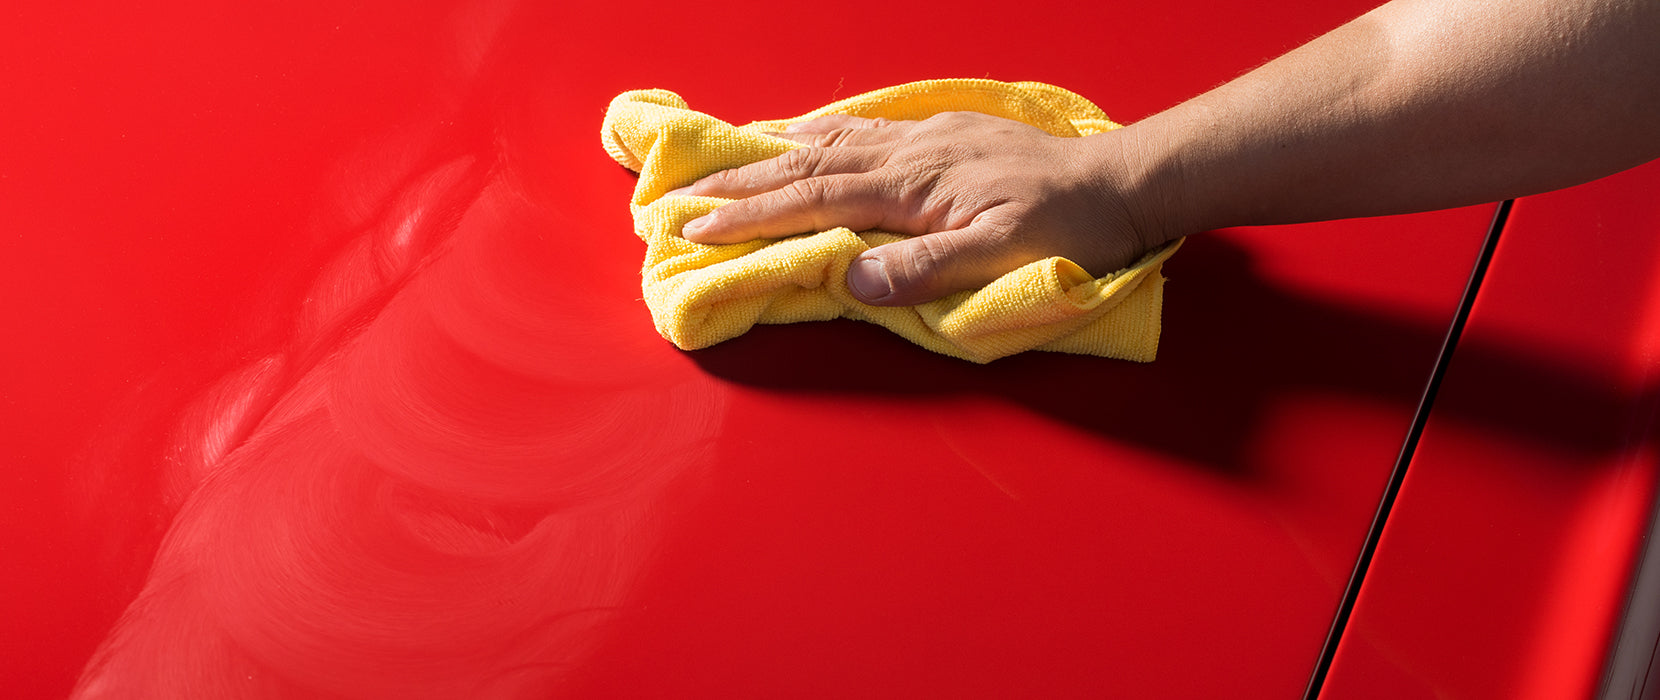 cleaning a car